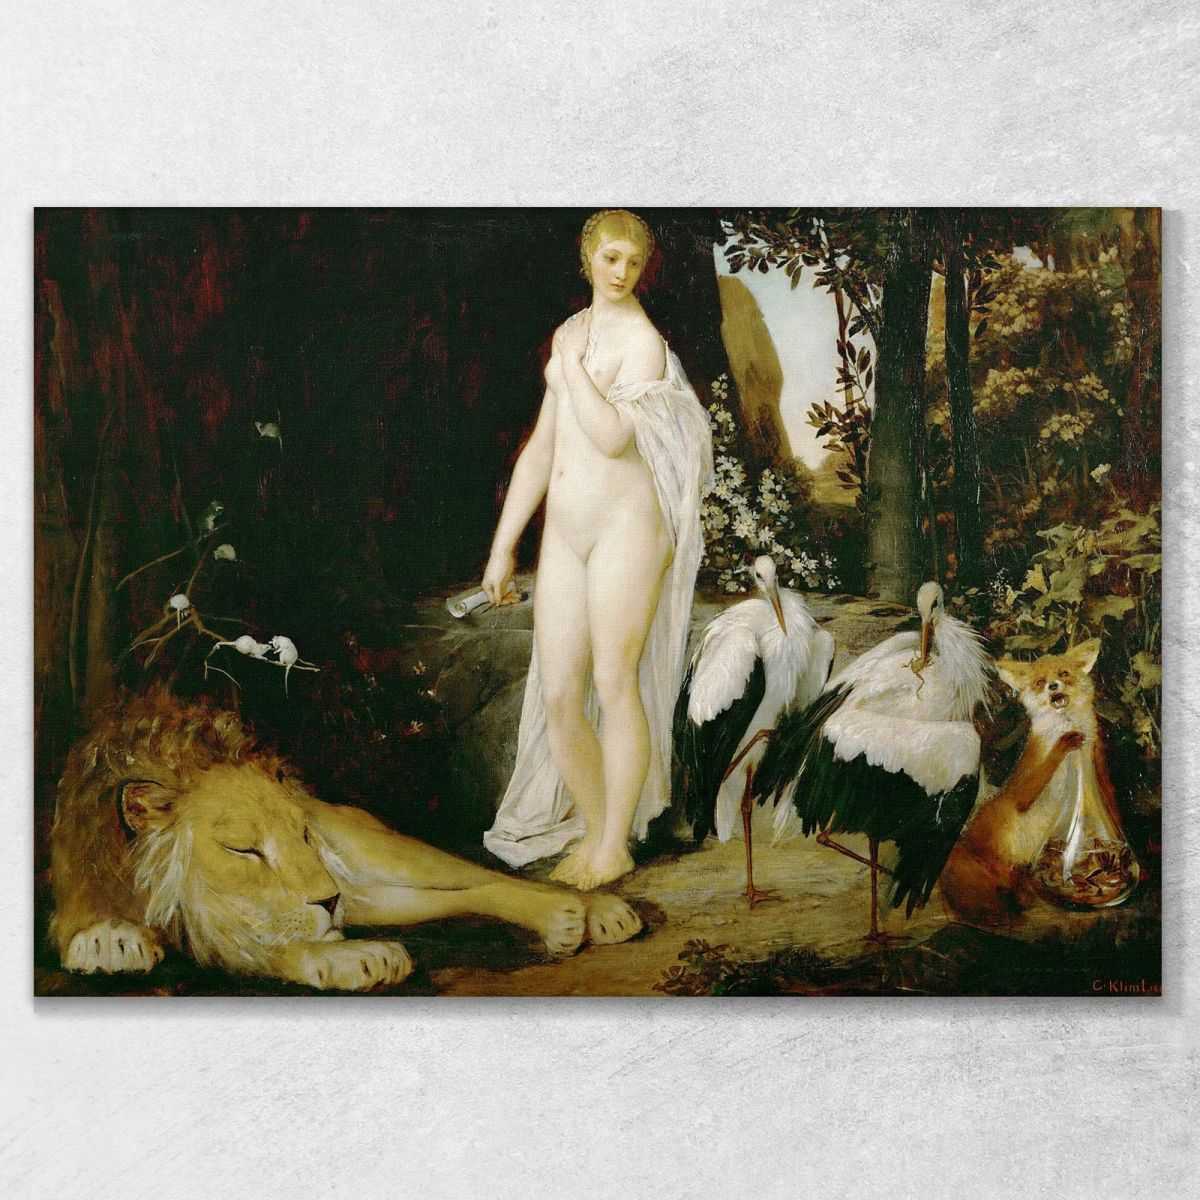 Nude With Animals In A Fairy Tale Landscape Gustav Klimt canvas print KG67